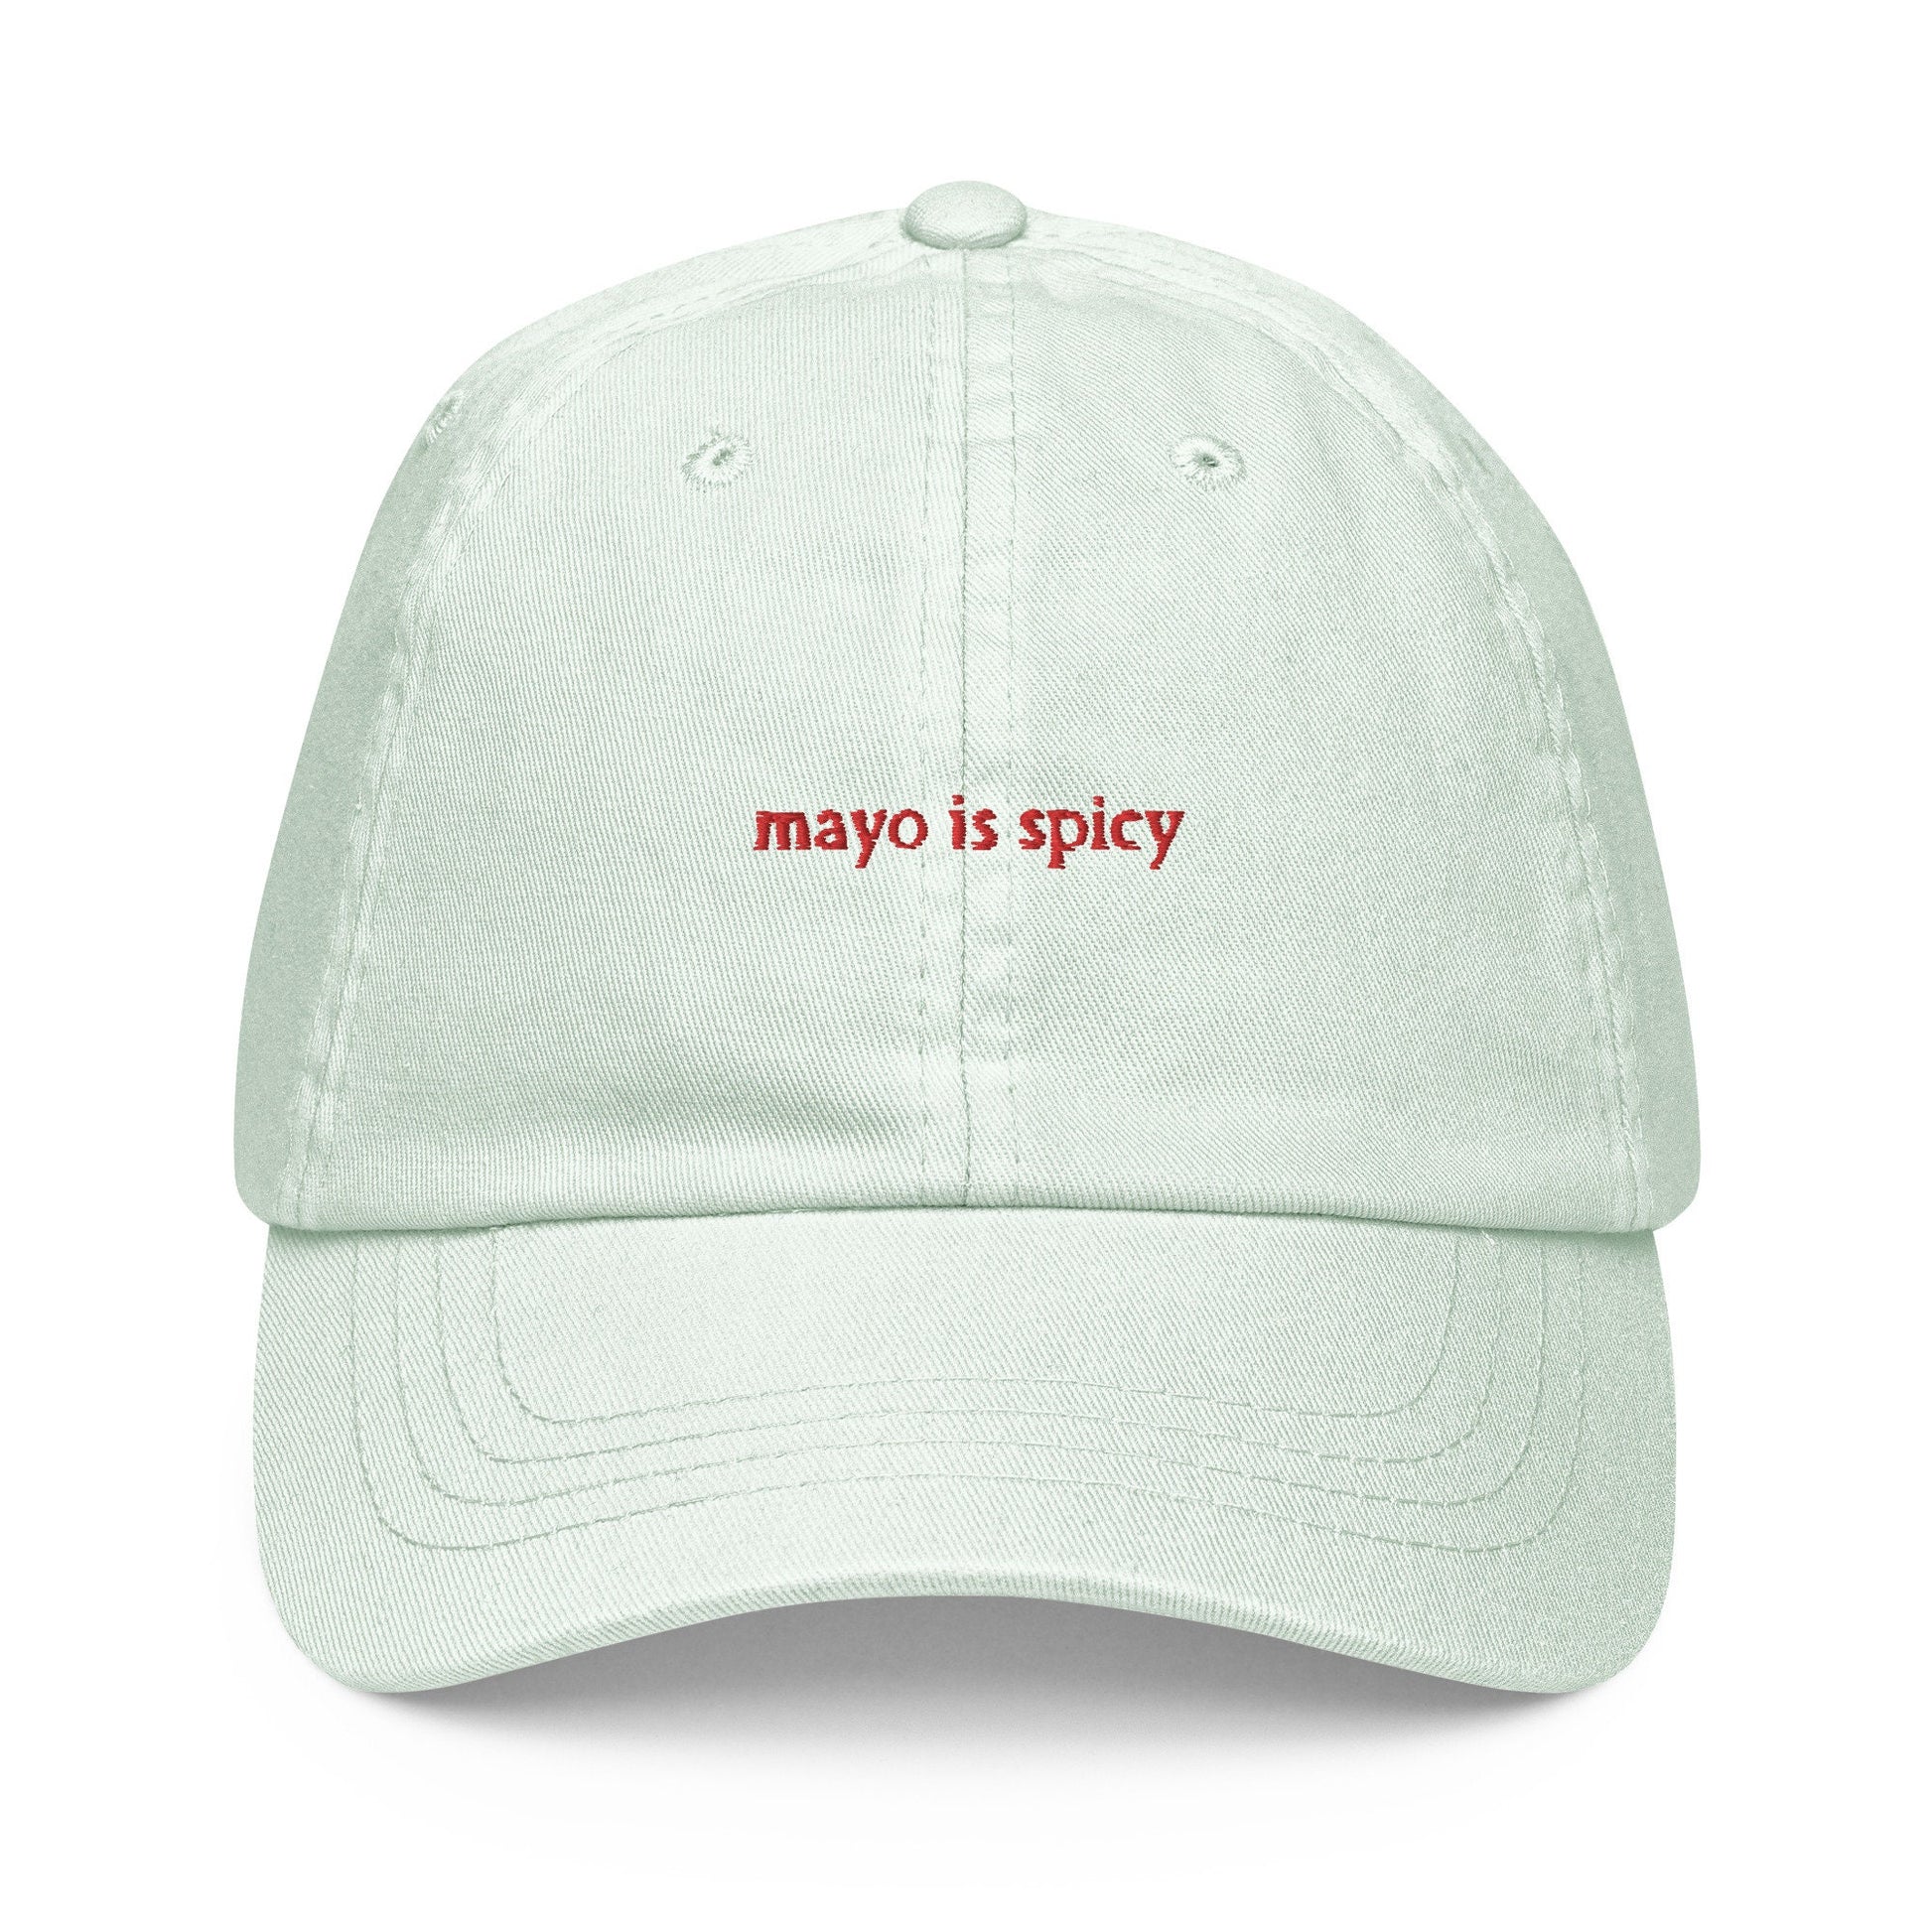 Mayo Dad Hat - Funny Best Friend Gift for Spice Intolerant Babies - Cotton embroidered Cap